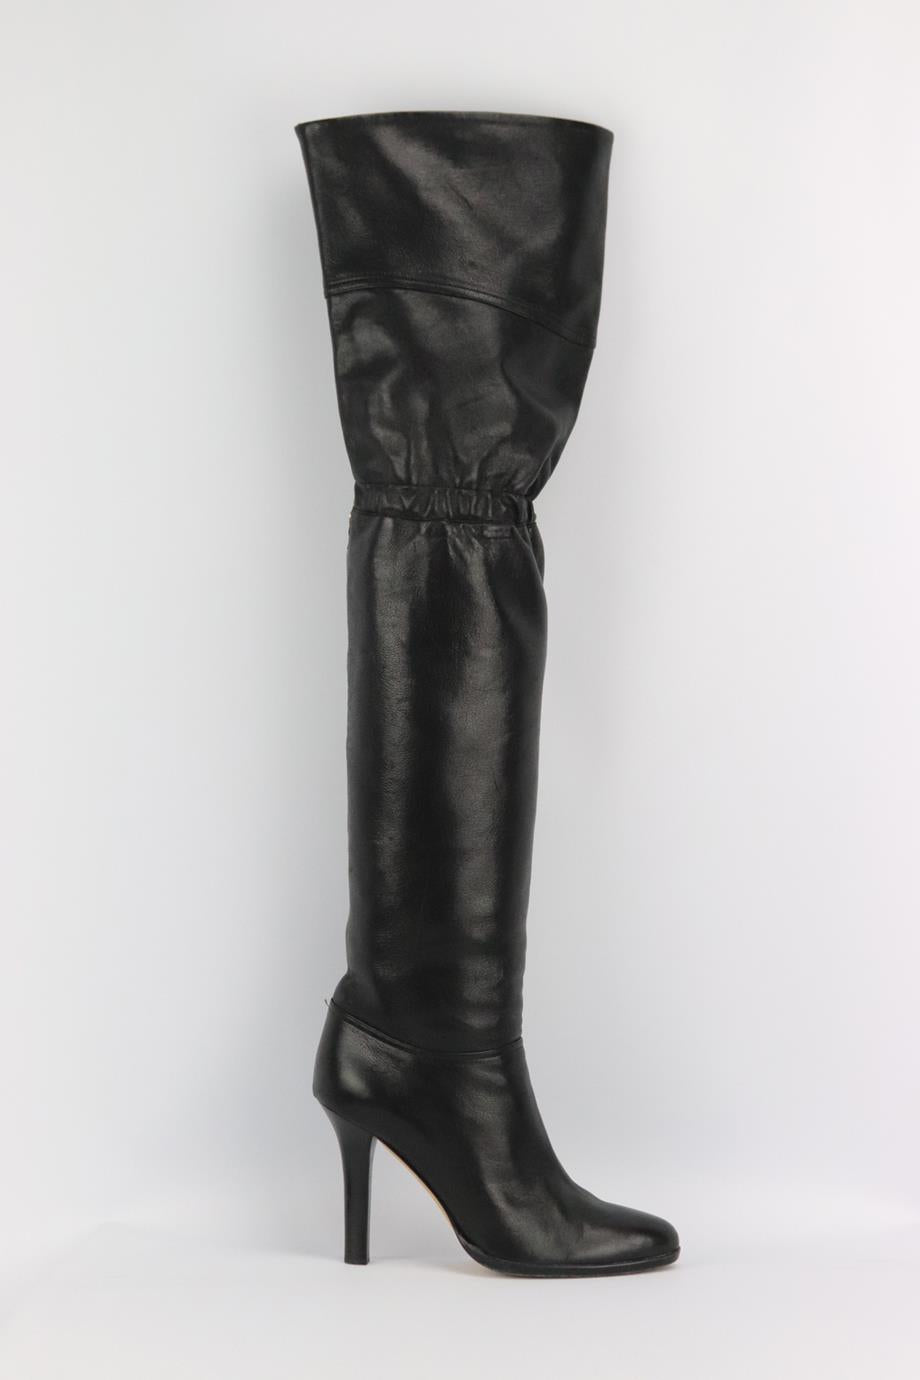 JIMMY CHOO LEATHER OVER THE KNEE BOOTS EU 38 UK 5 US 8